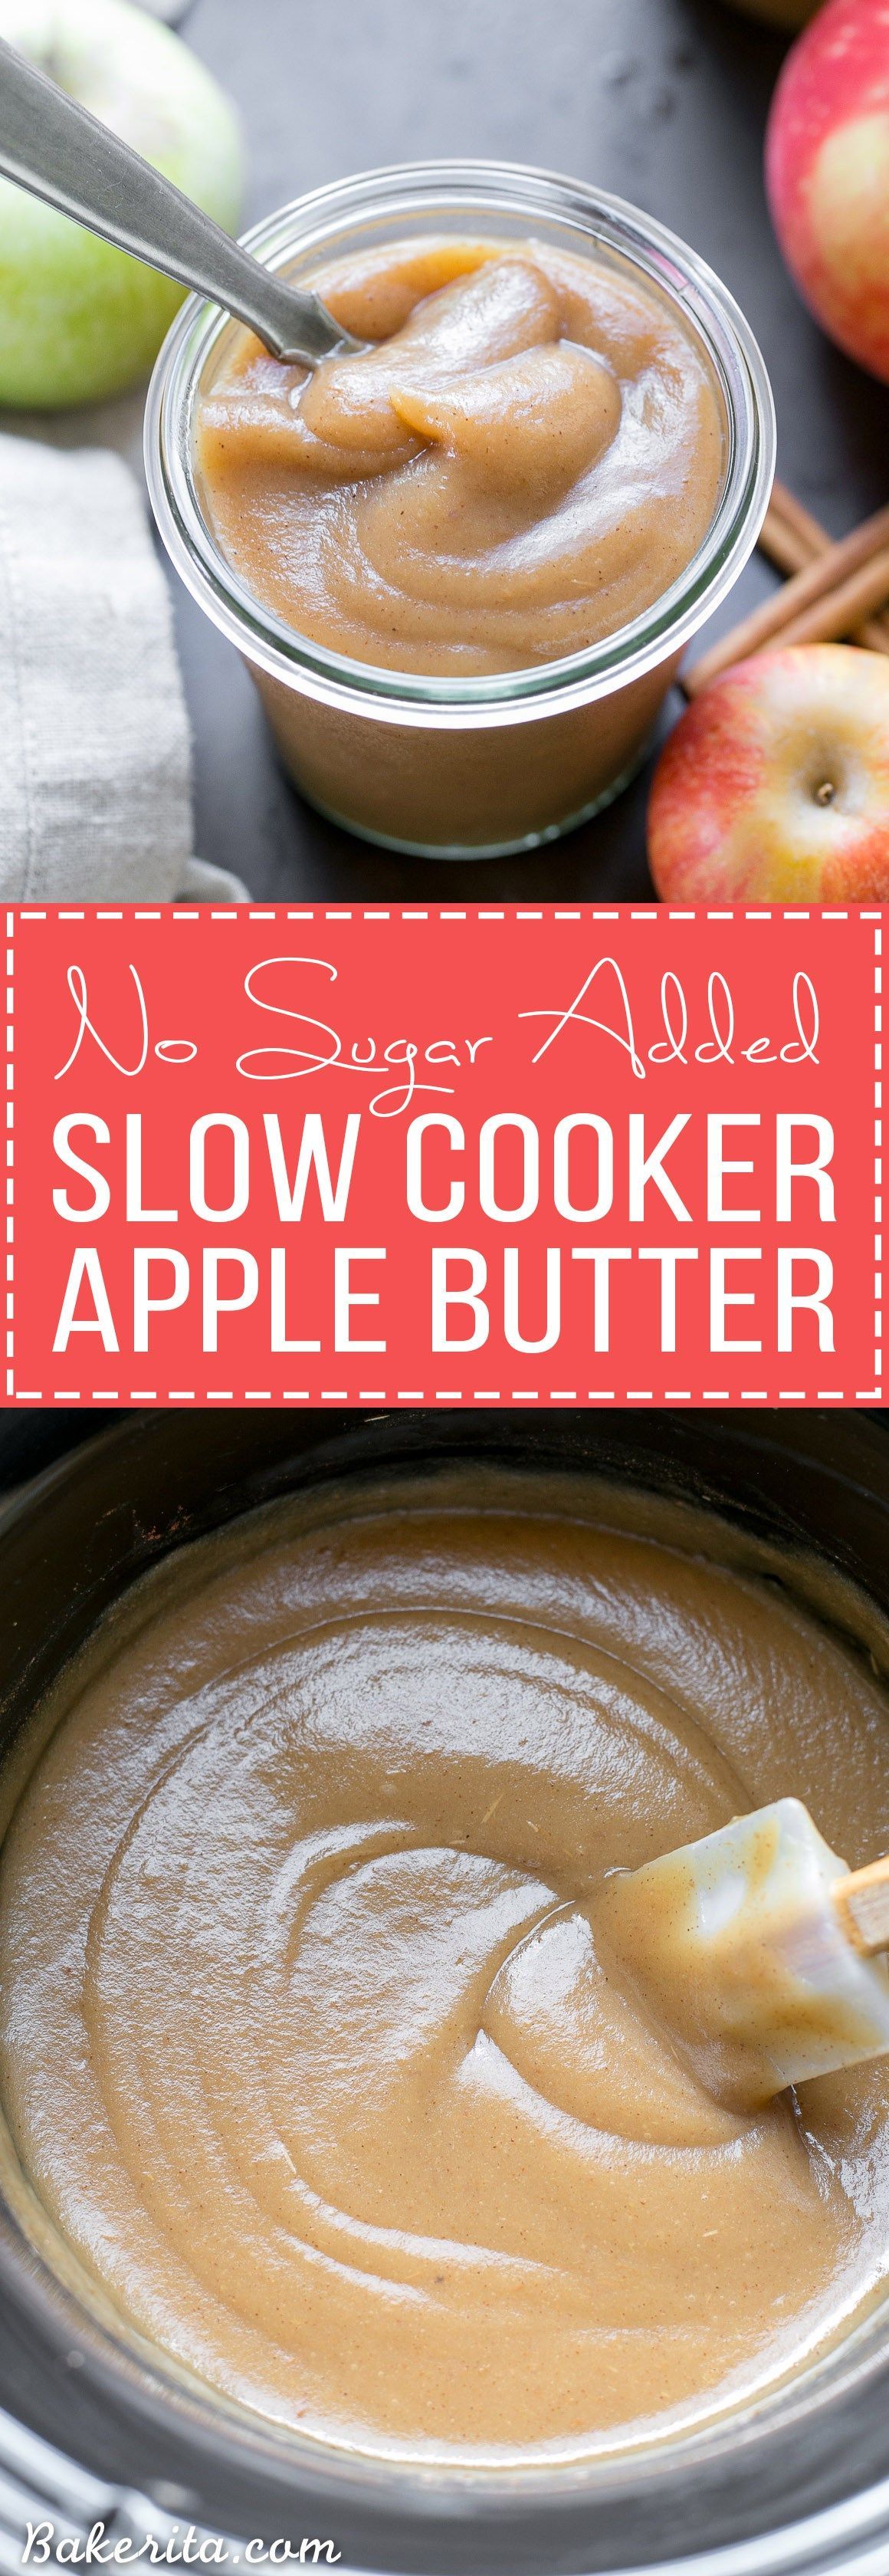 This Slow Cooker Apple Butter has no sugar added - just fresh apples, cinnamon, nutmeg, and a little lemon juice. This homemade healthy apple butter can be enjoyed on toast, stirred into oatmeal or yogurt, or eaten by the spoonful! -   23 apple recipes vegan
 ideas